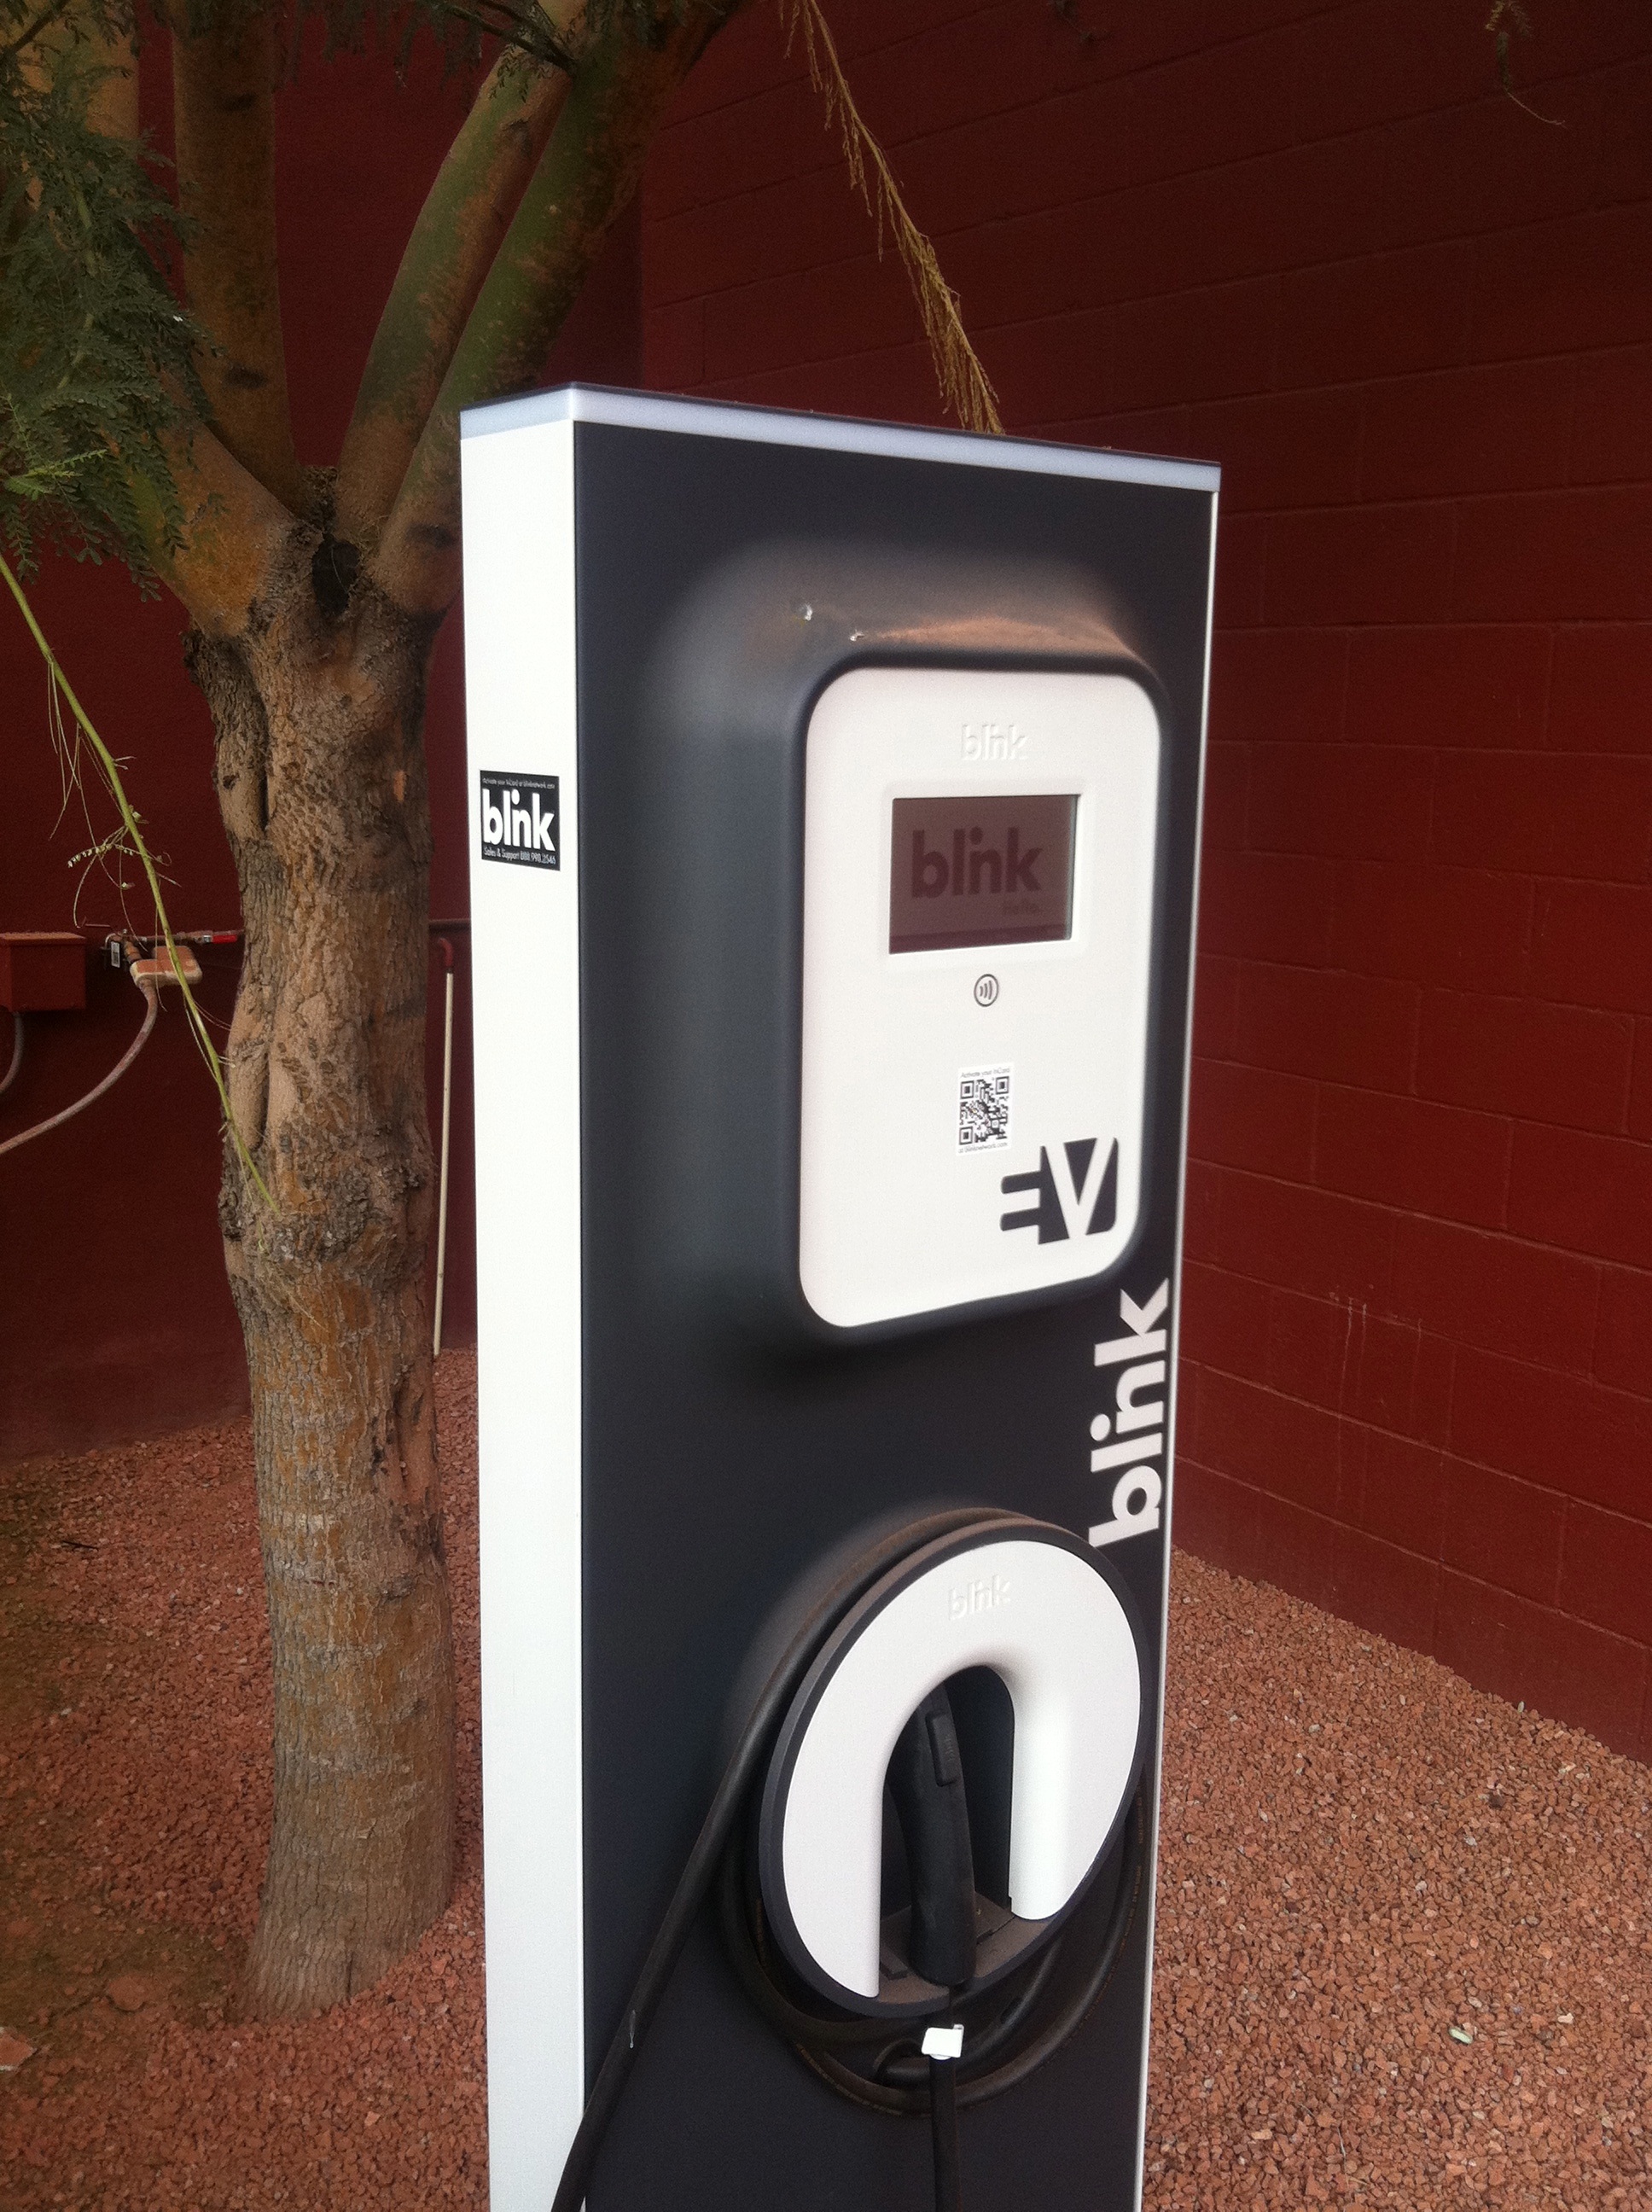 ElectricCar Charging Stations Going In? Best Practices Guide Issued